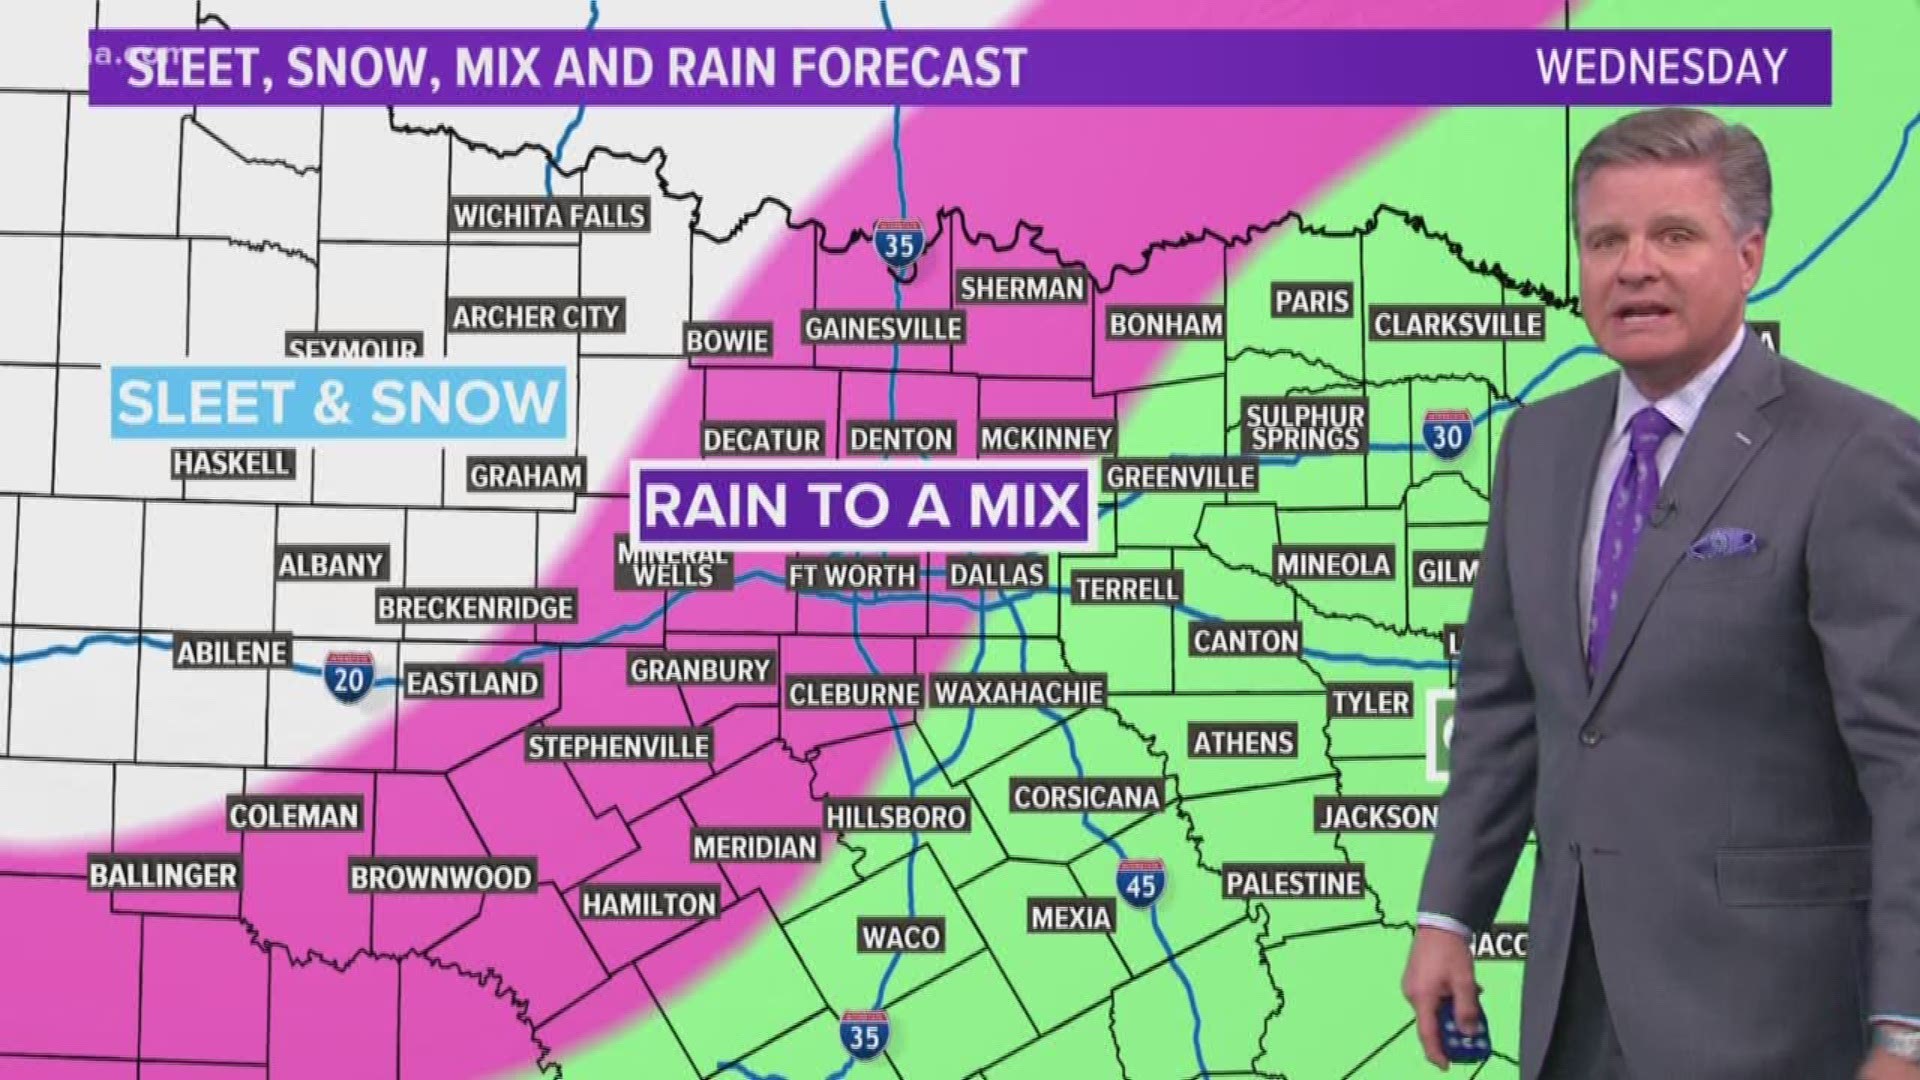 Will you see snow, sleet or rain? Pete Delkus has your latest forecast for Tuesday, Feb. 4.